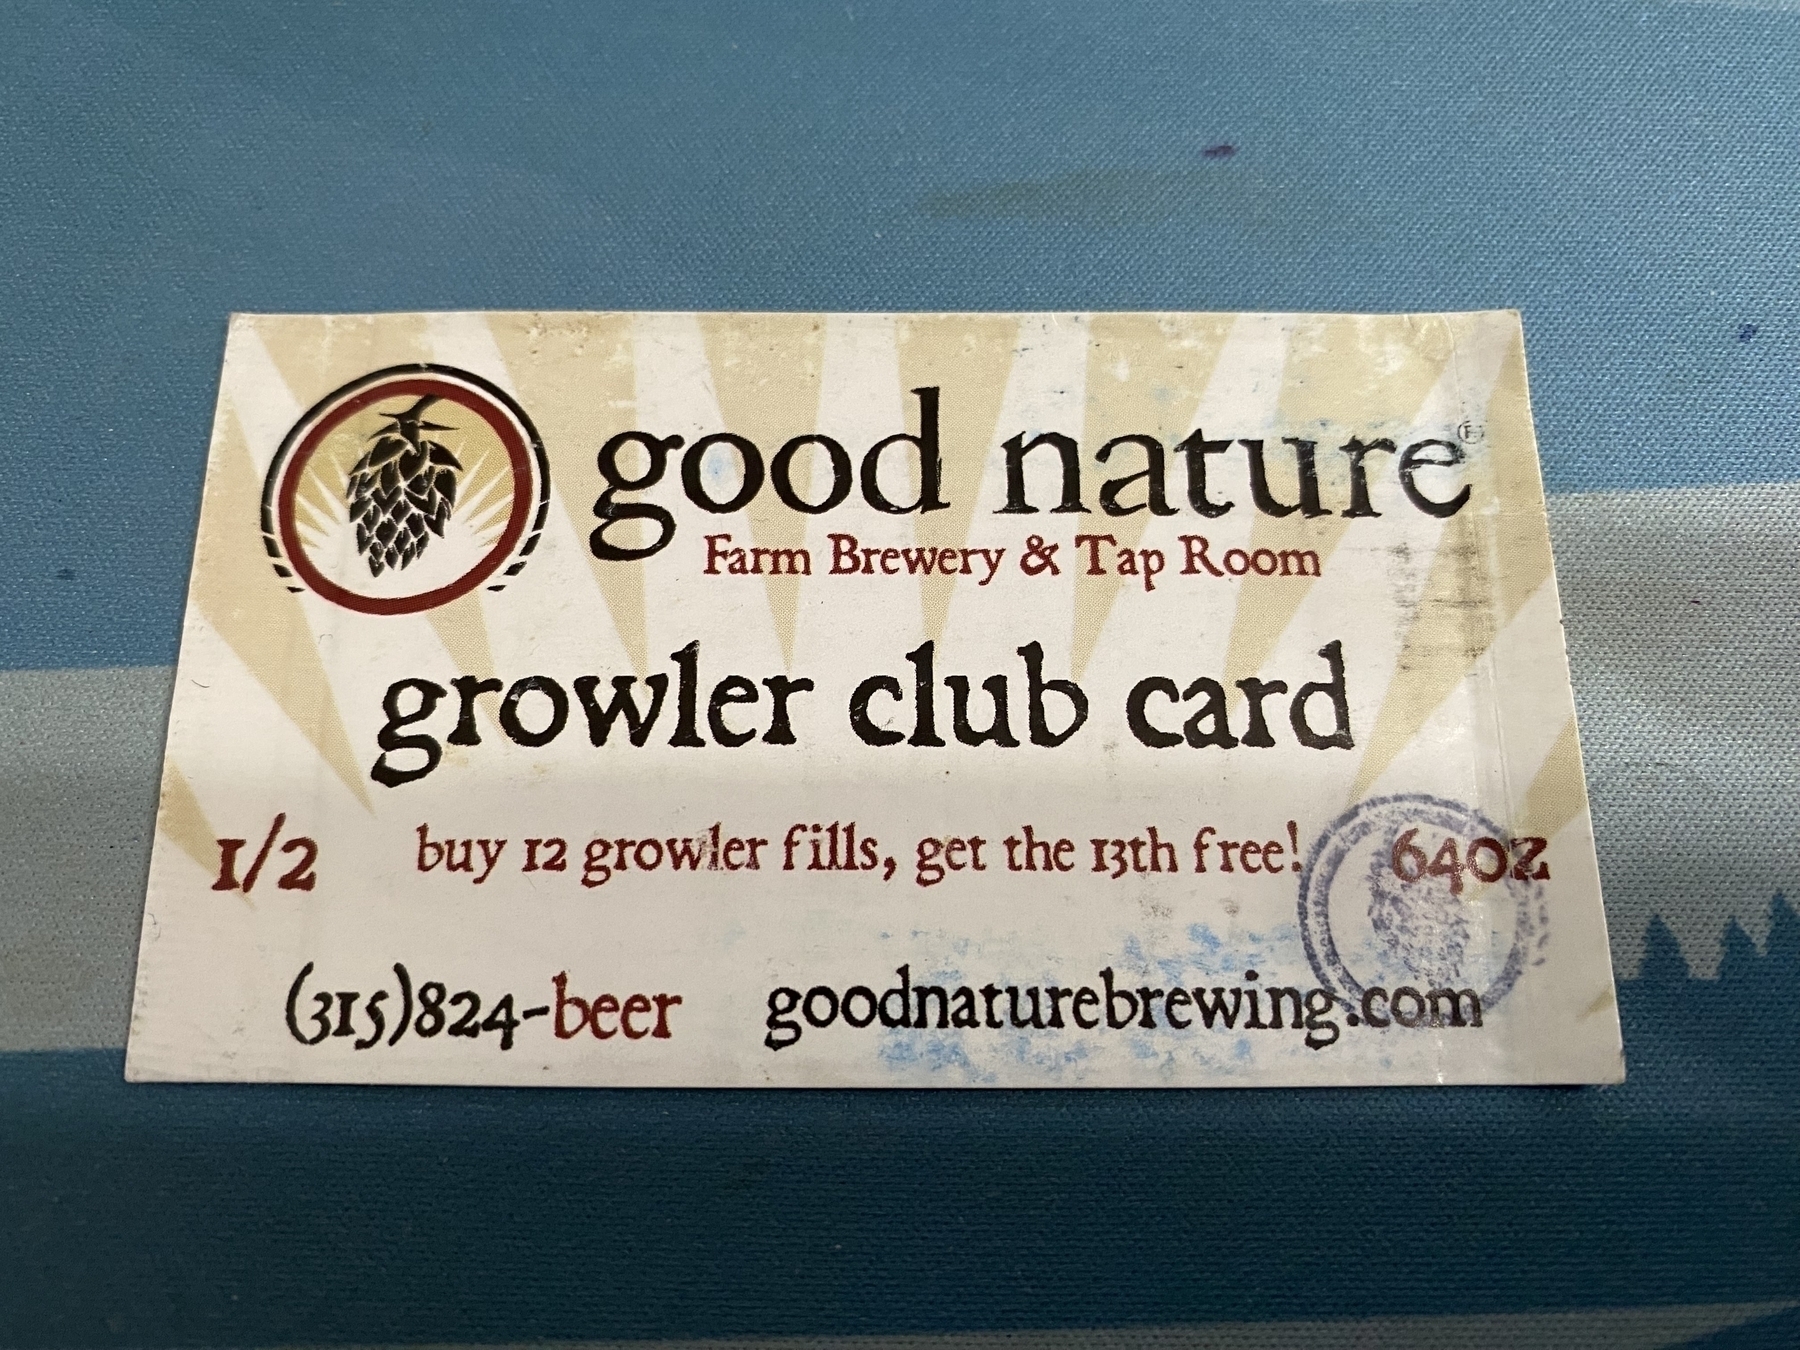 A (beer) growler club card for Good Nature Brewing.